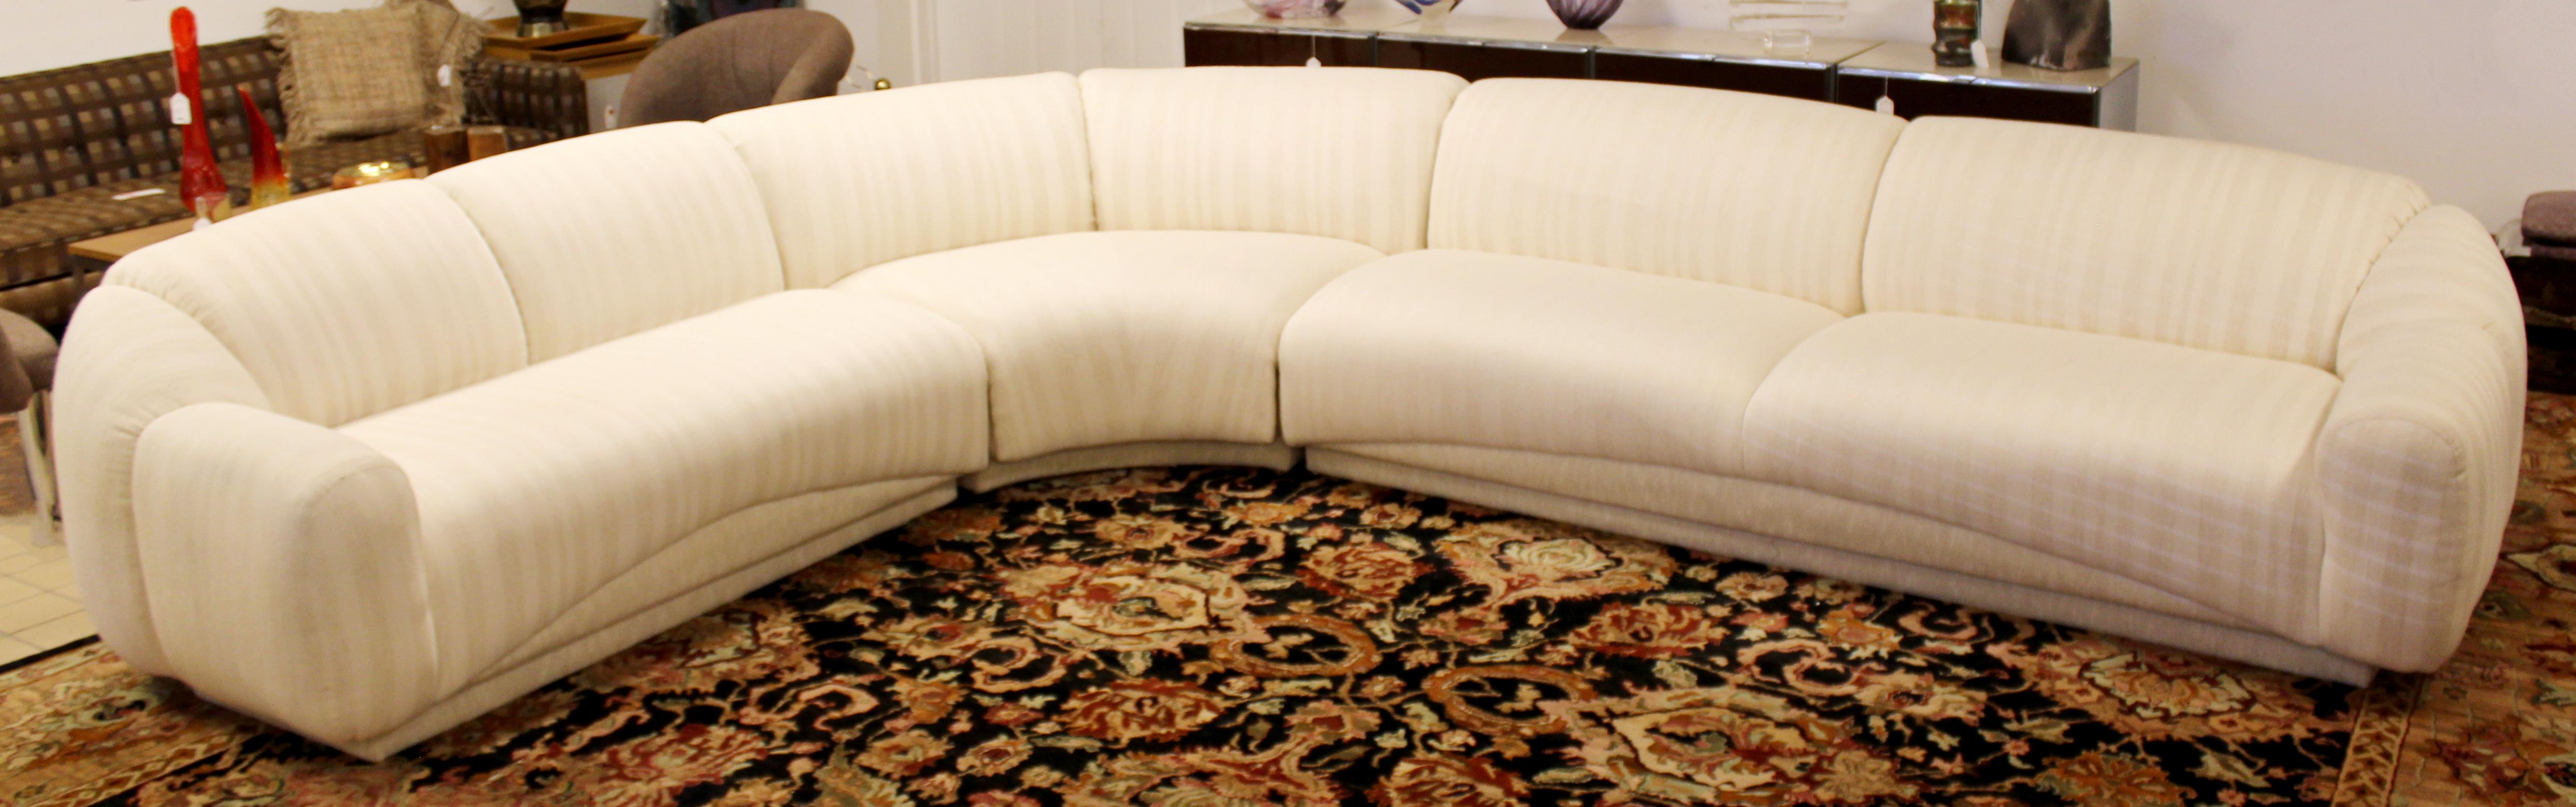 Fabric Contemporary Modern Sculptural Serpentine Sofa Sectional Kagan Style 1980s